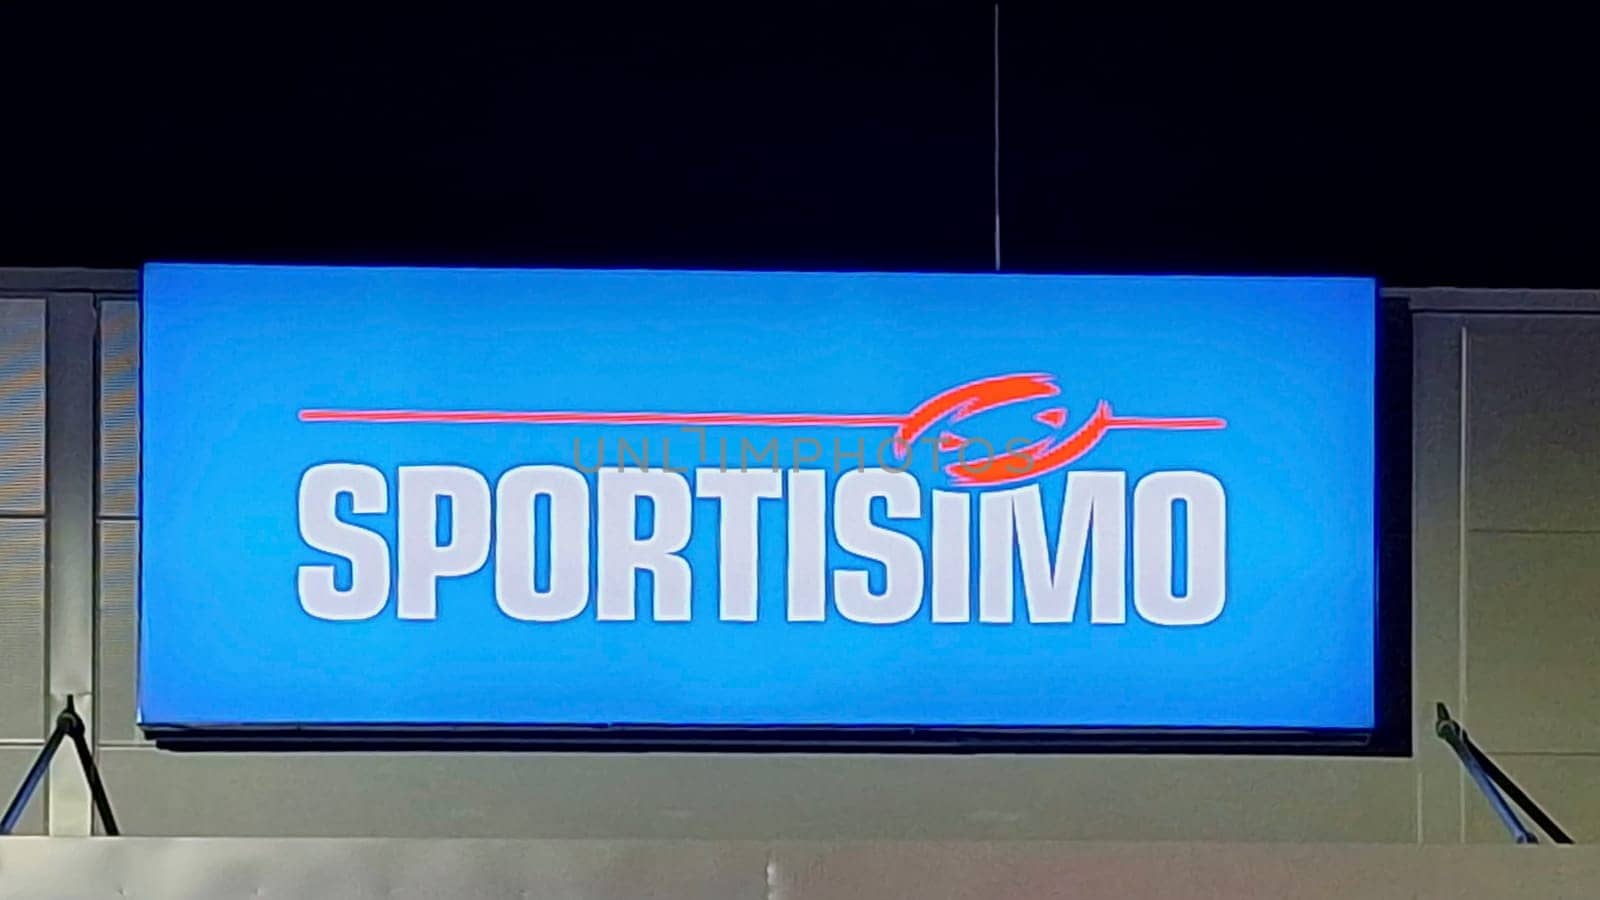 Sportisimo logo on hypermarket. Sportisimo is a Czech chain of stores and an online store with sport equipment. Sportisimo operates stores in the Czech Republic, Slovakia, Hungary, Romania, Bulgaria and Croatia. by roman_nerud